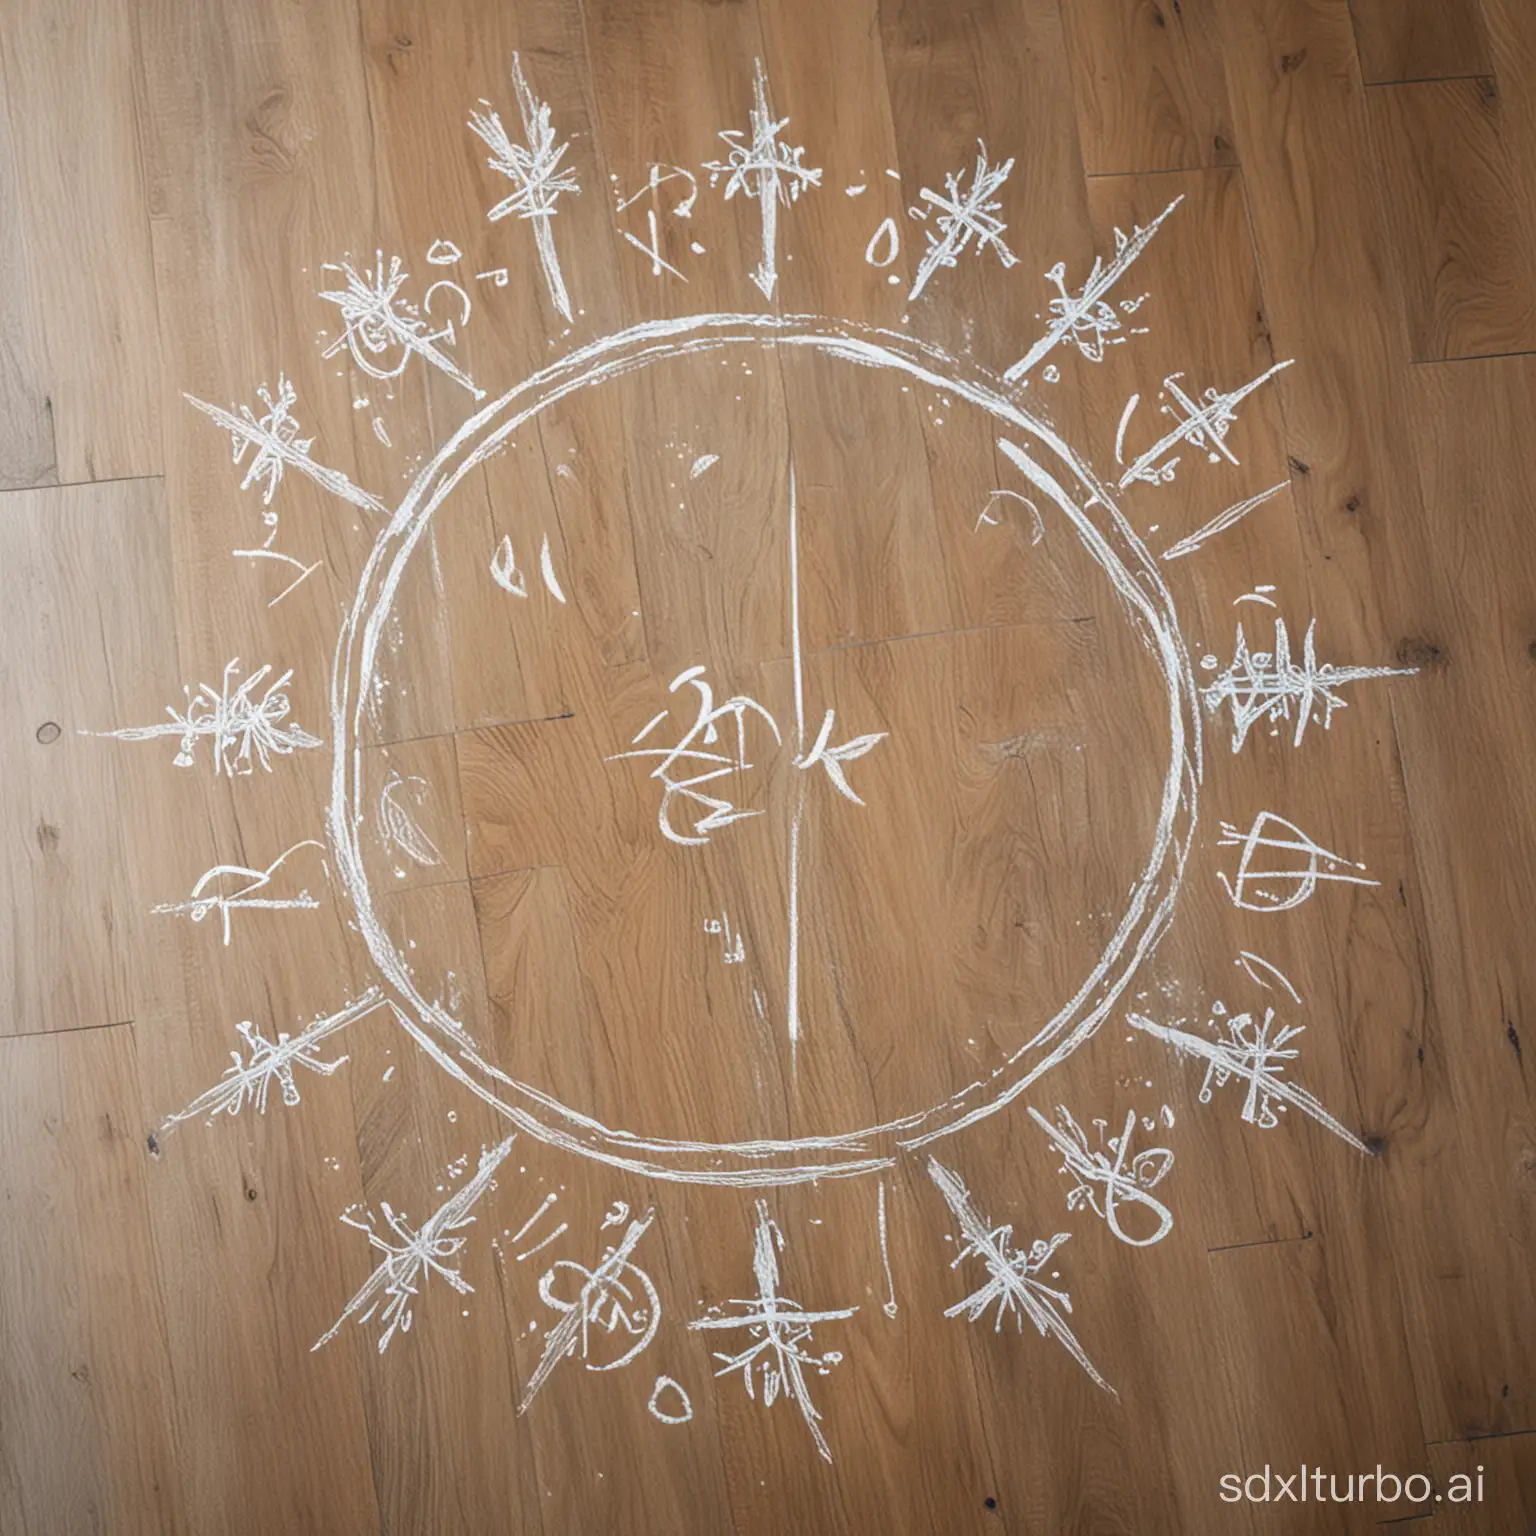 Nordic-Cold-Rune-Circle-on-Wooden-Floor